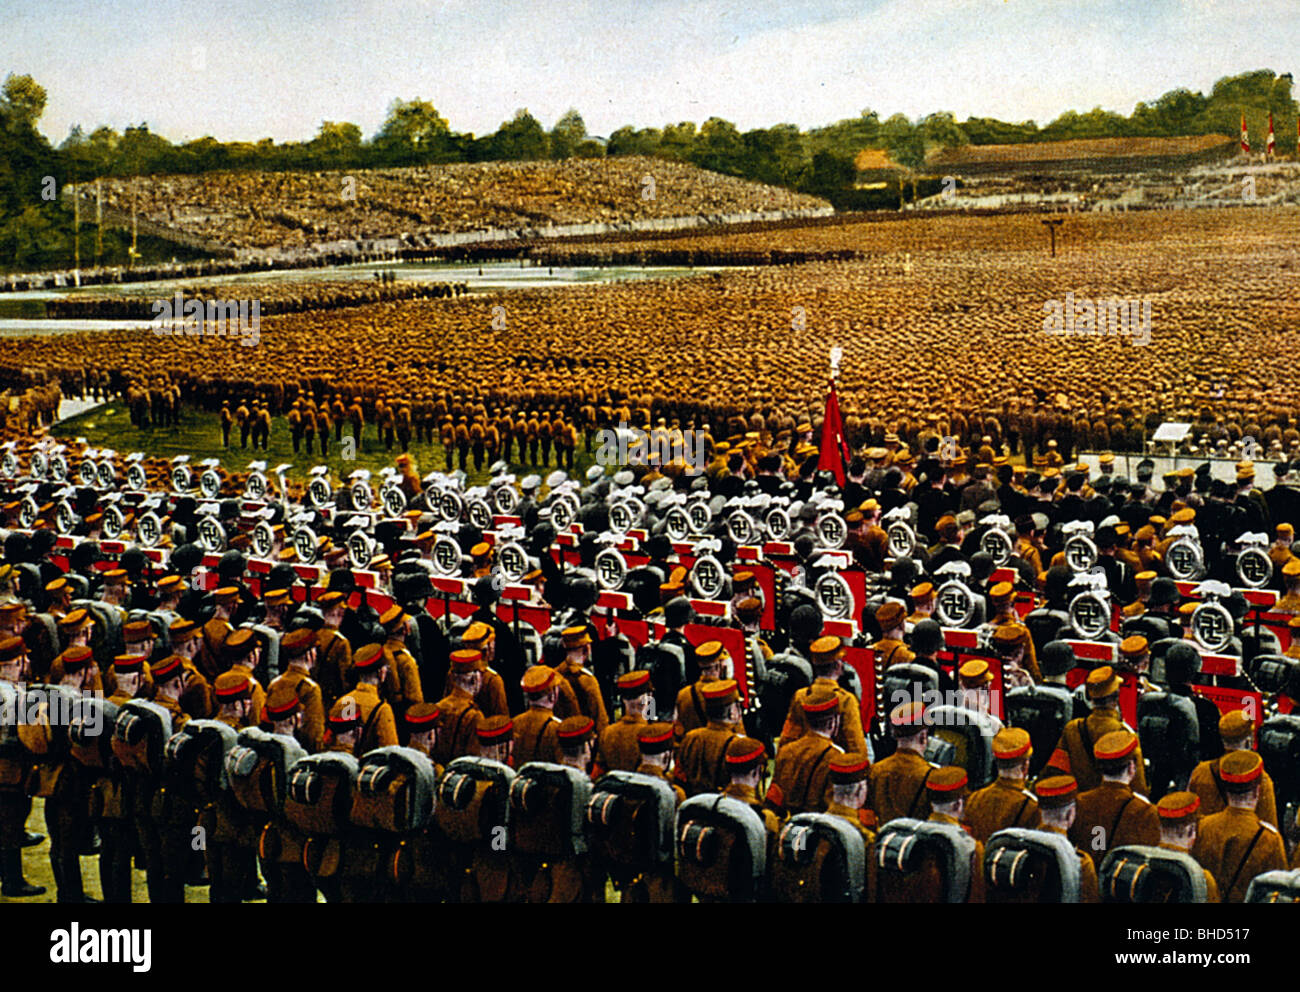 National Socialism / Nazism, Nuremberg Rallies, 'Reichsparteitag des Sieges' ('Rally of Victory'), parade of the Sturmabteilung units (SA), Luitpoldhain, coloured photograph by Heinrich Hoffmann, Stock Photo